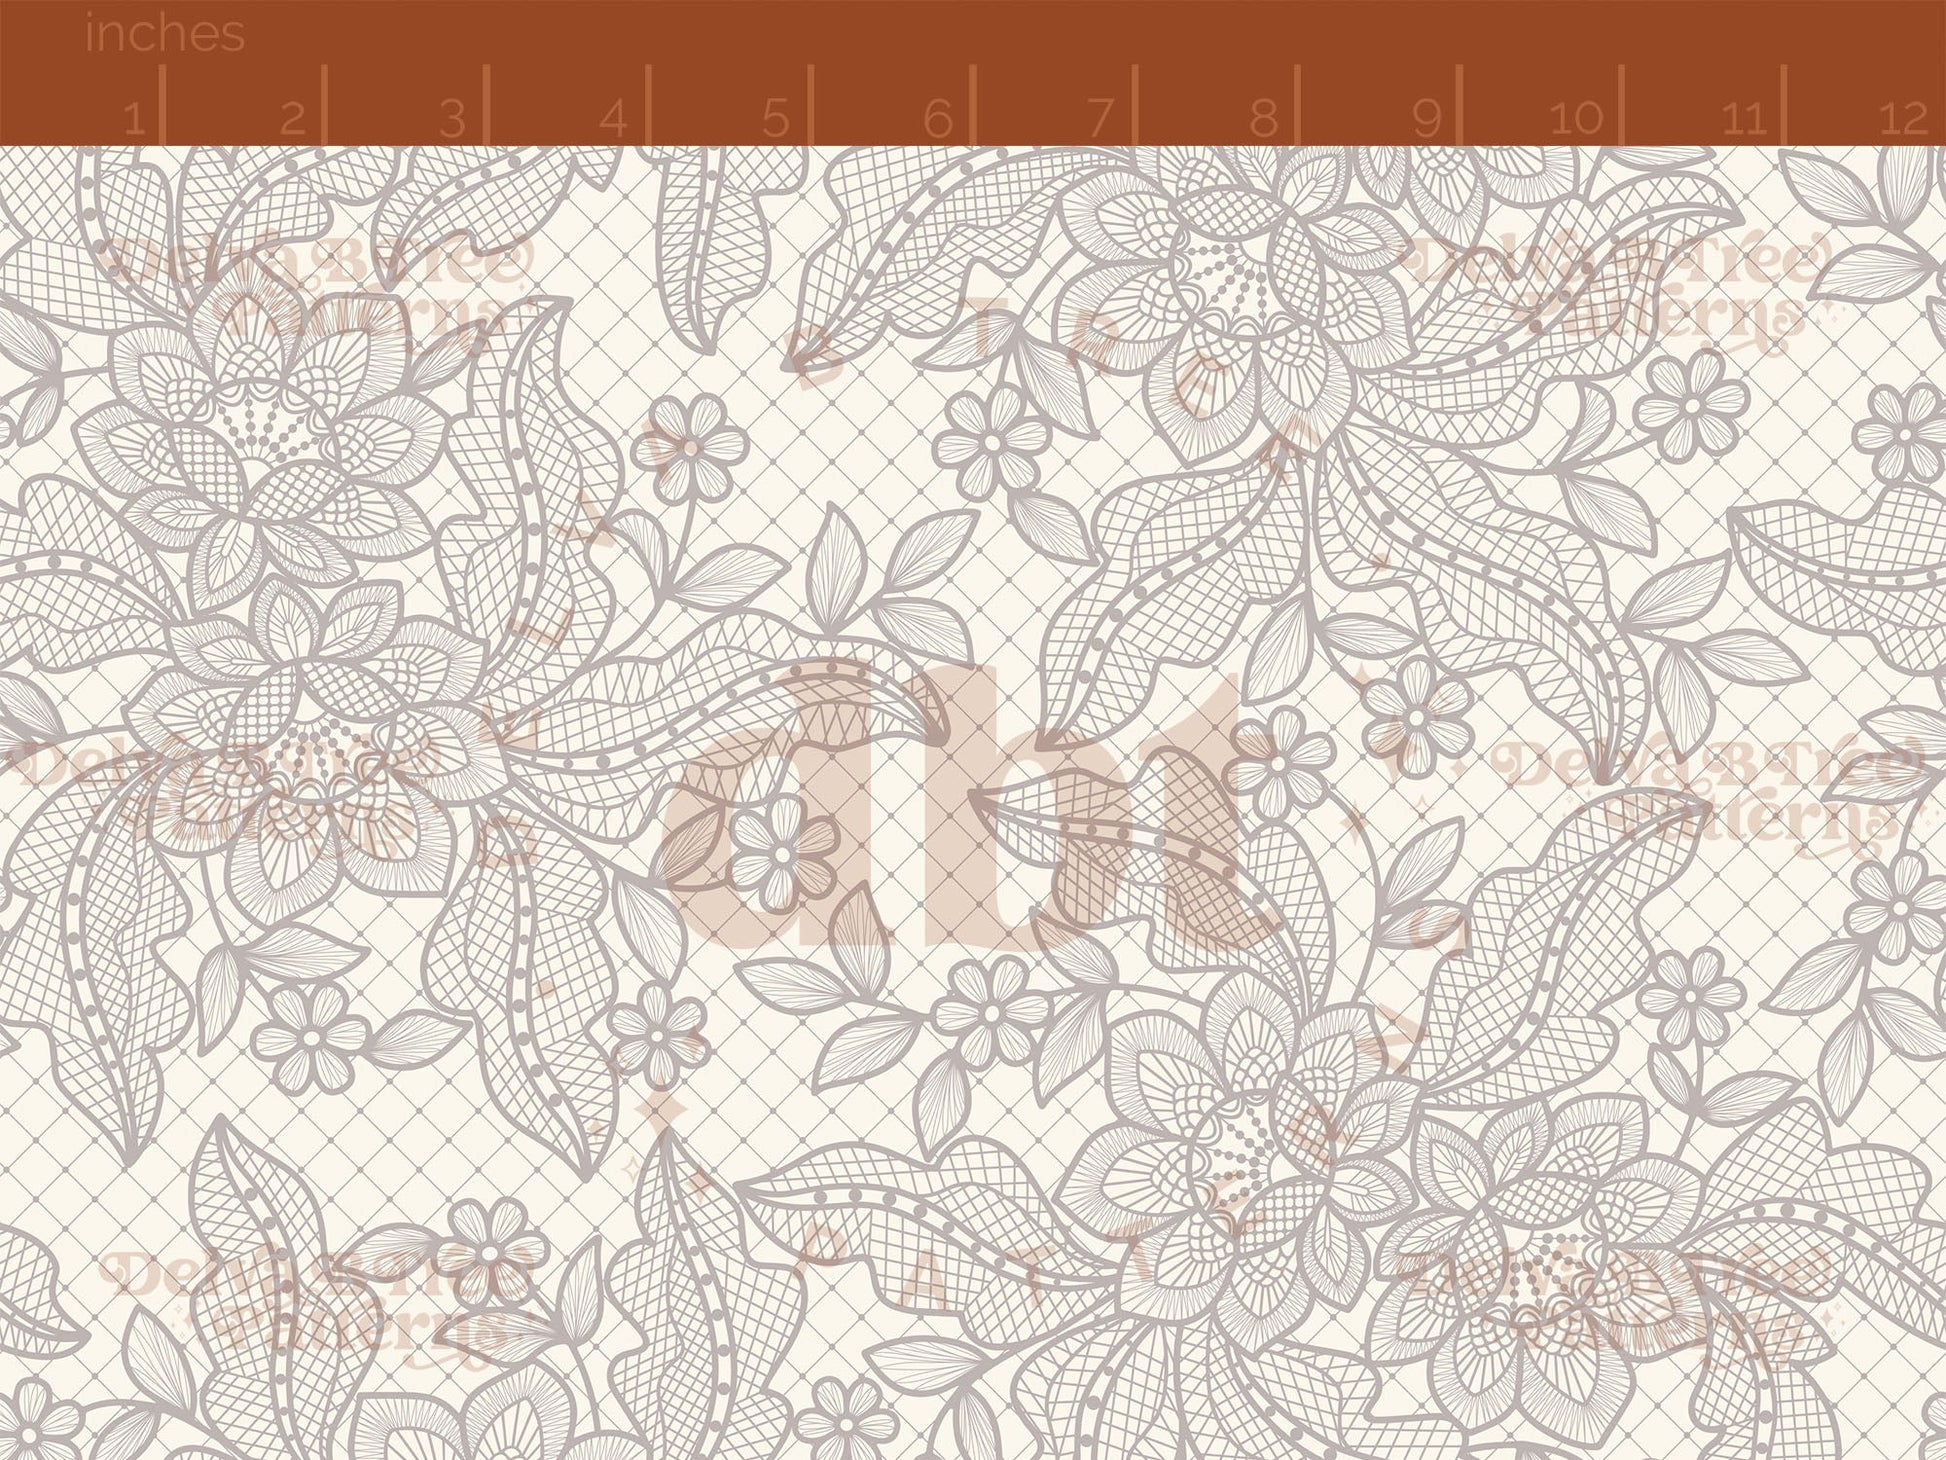 Pale Grey Umber flowers, leaves and faux lace netting on an off white / ivory / cream background seamless pattern scale digital file for small shops that make handmade products in small batches.